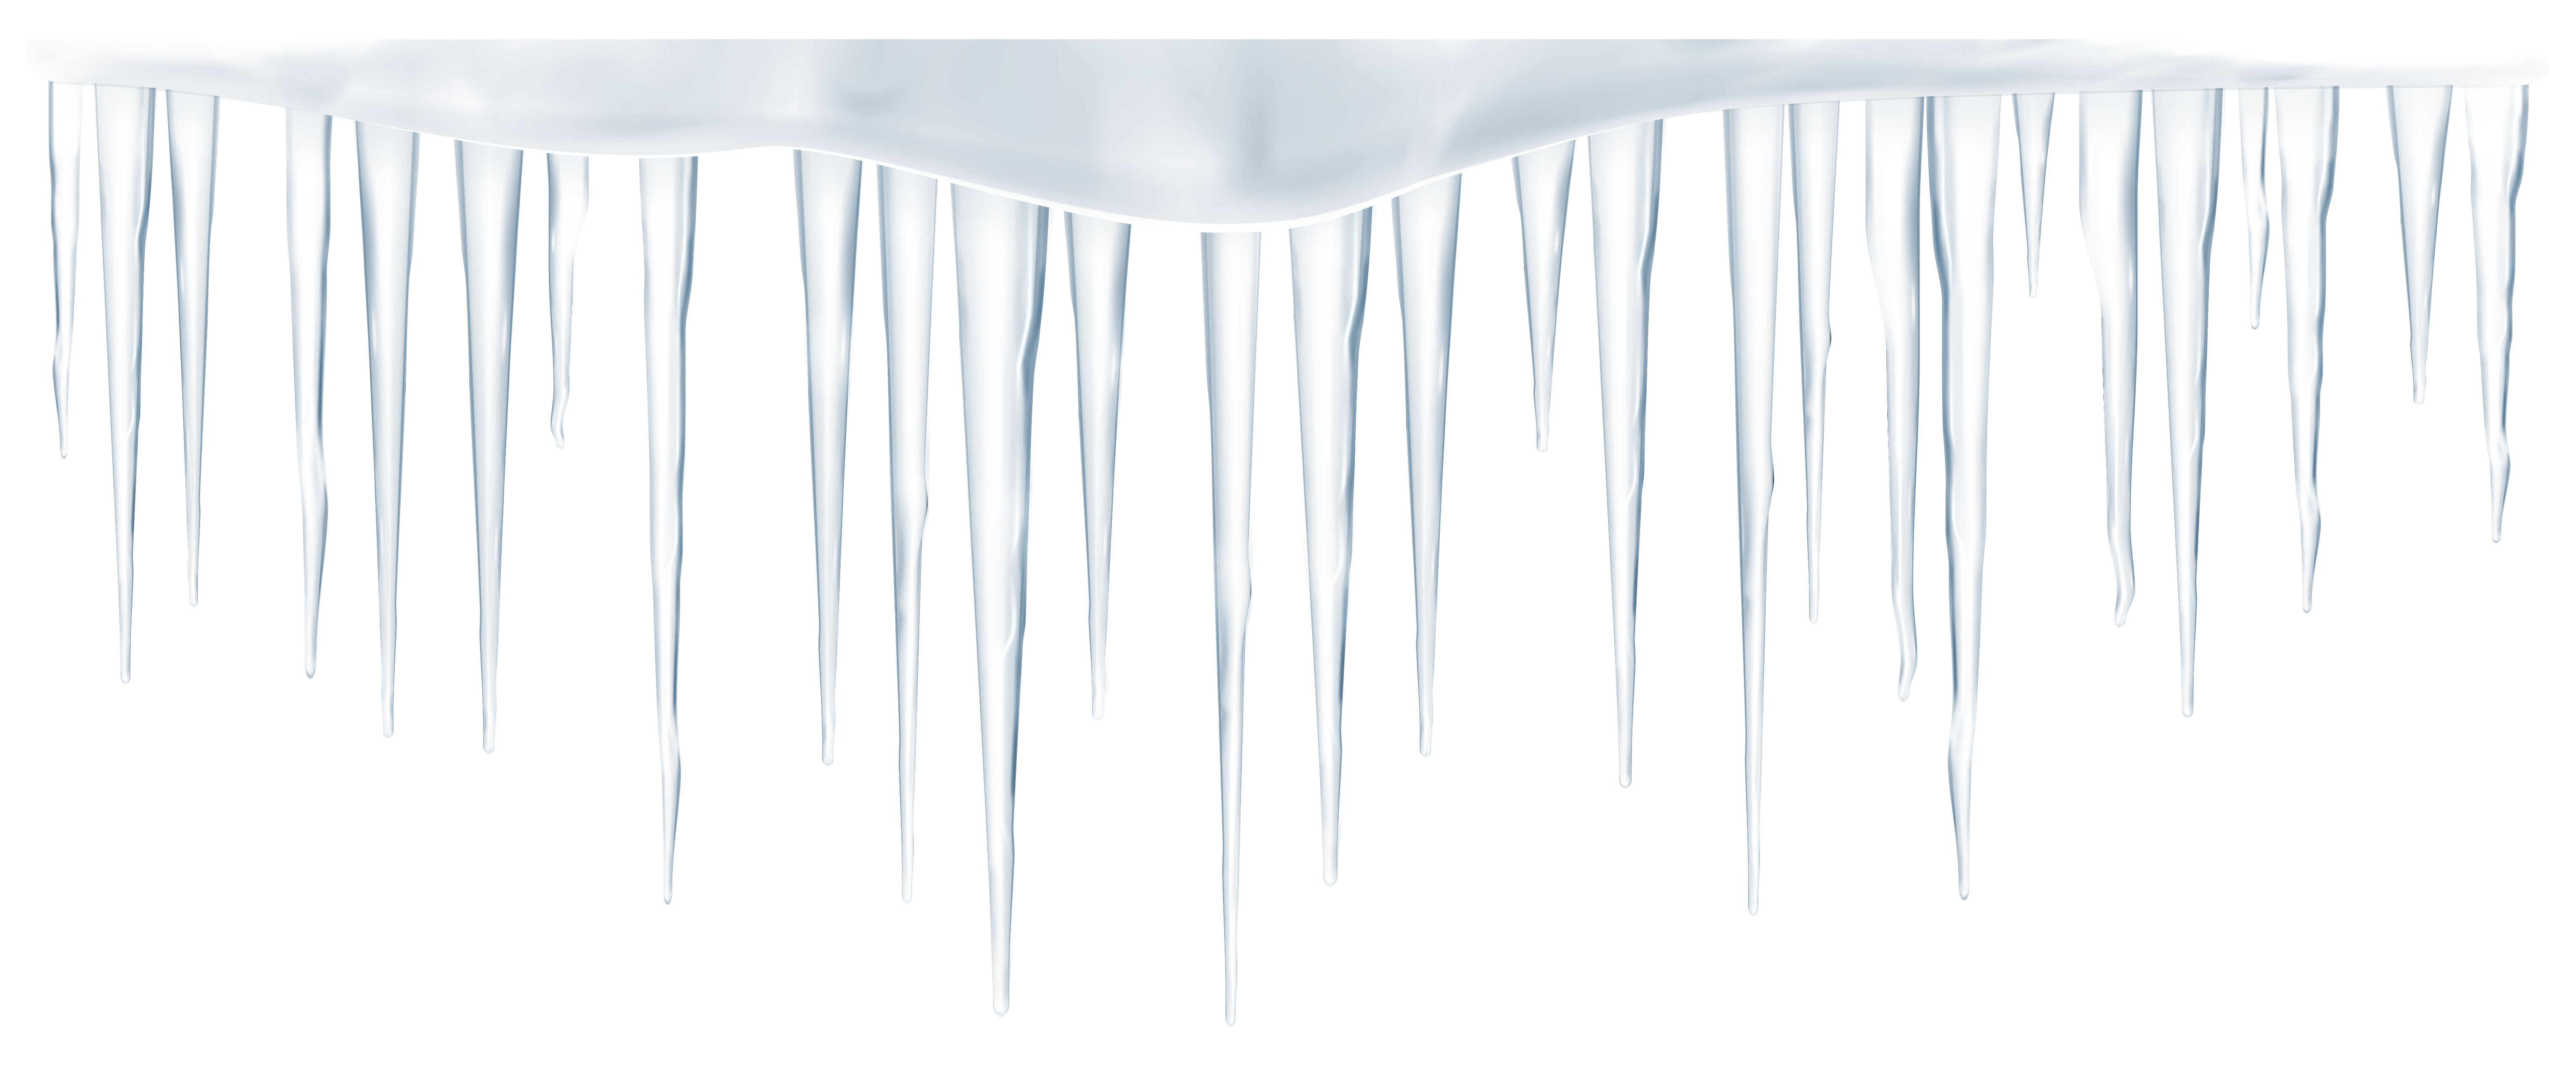 Icicles Image Free Download Image PNG Image